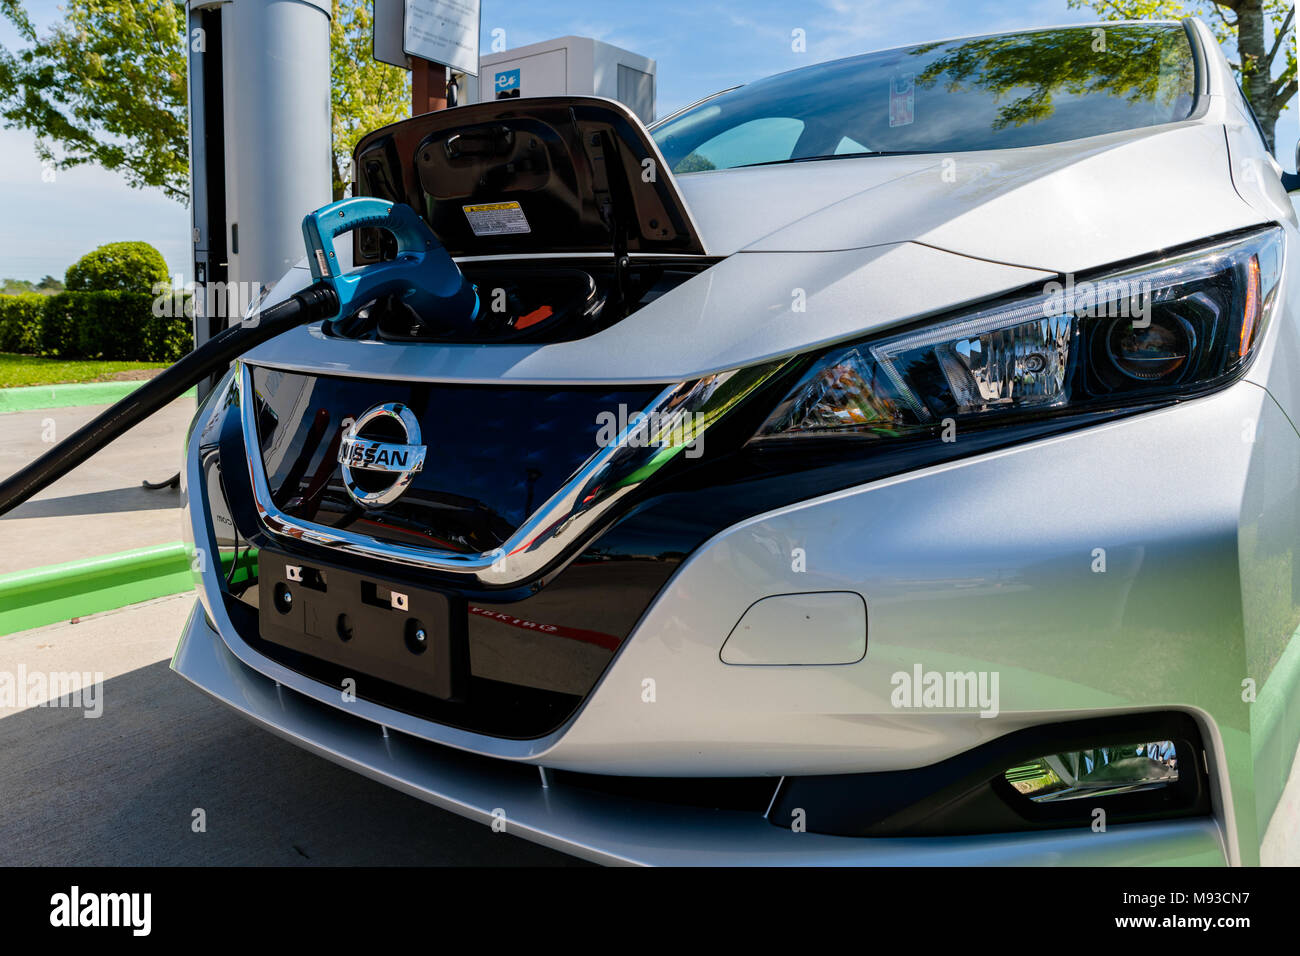 Pearland, Texas - March 21, 2018: New 2018 Nissan Leaf electric car plugged in to charge battery at the EVgo charging station Stock Photo